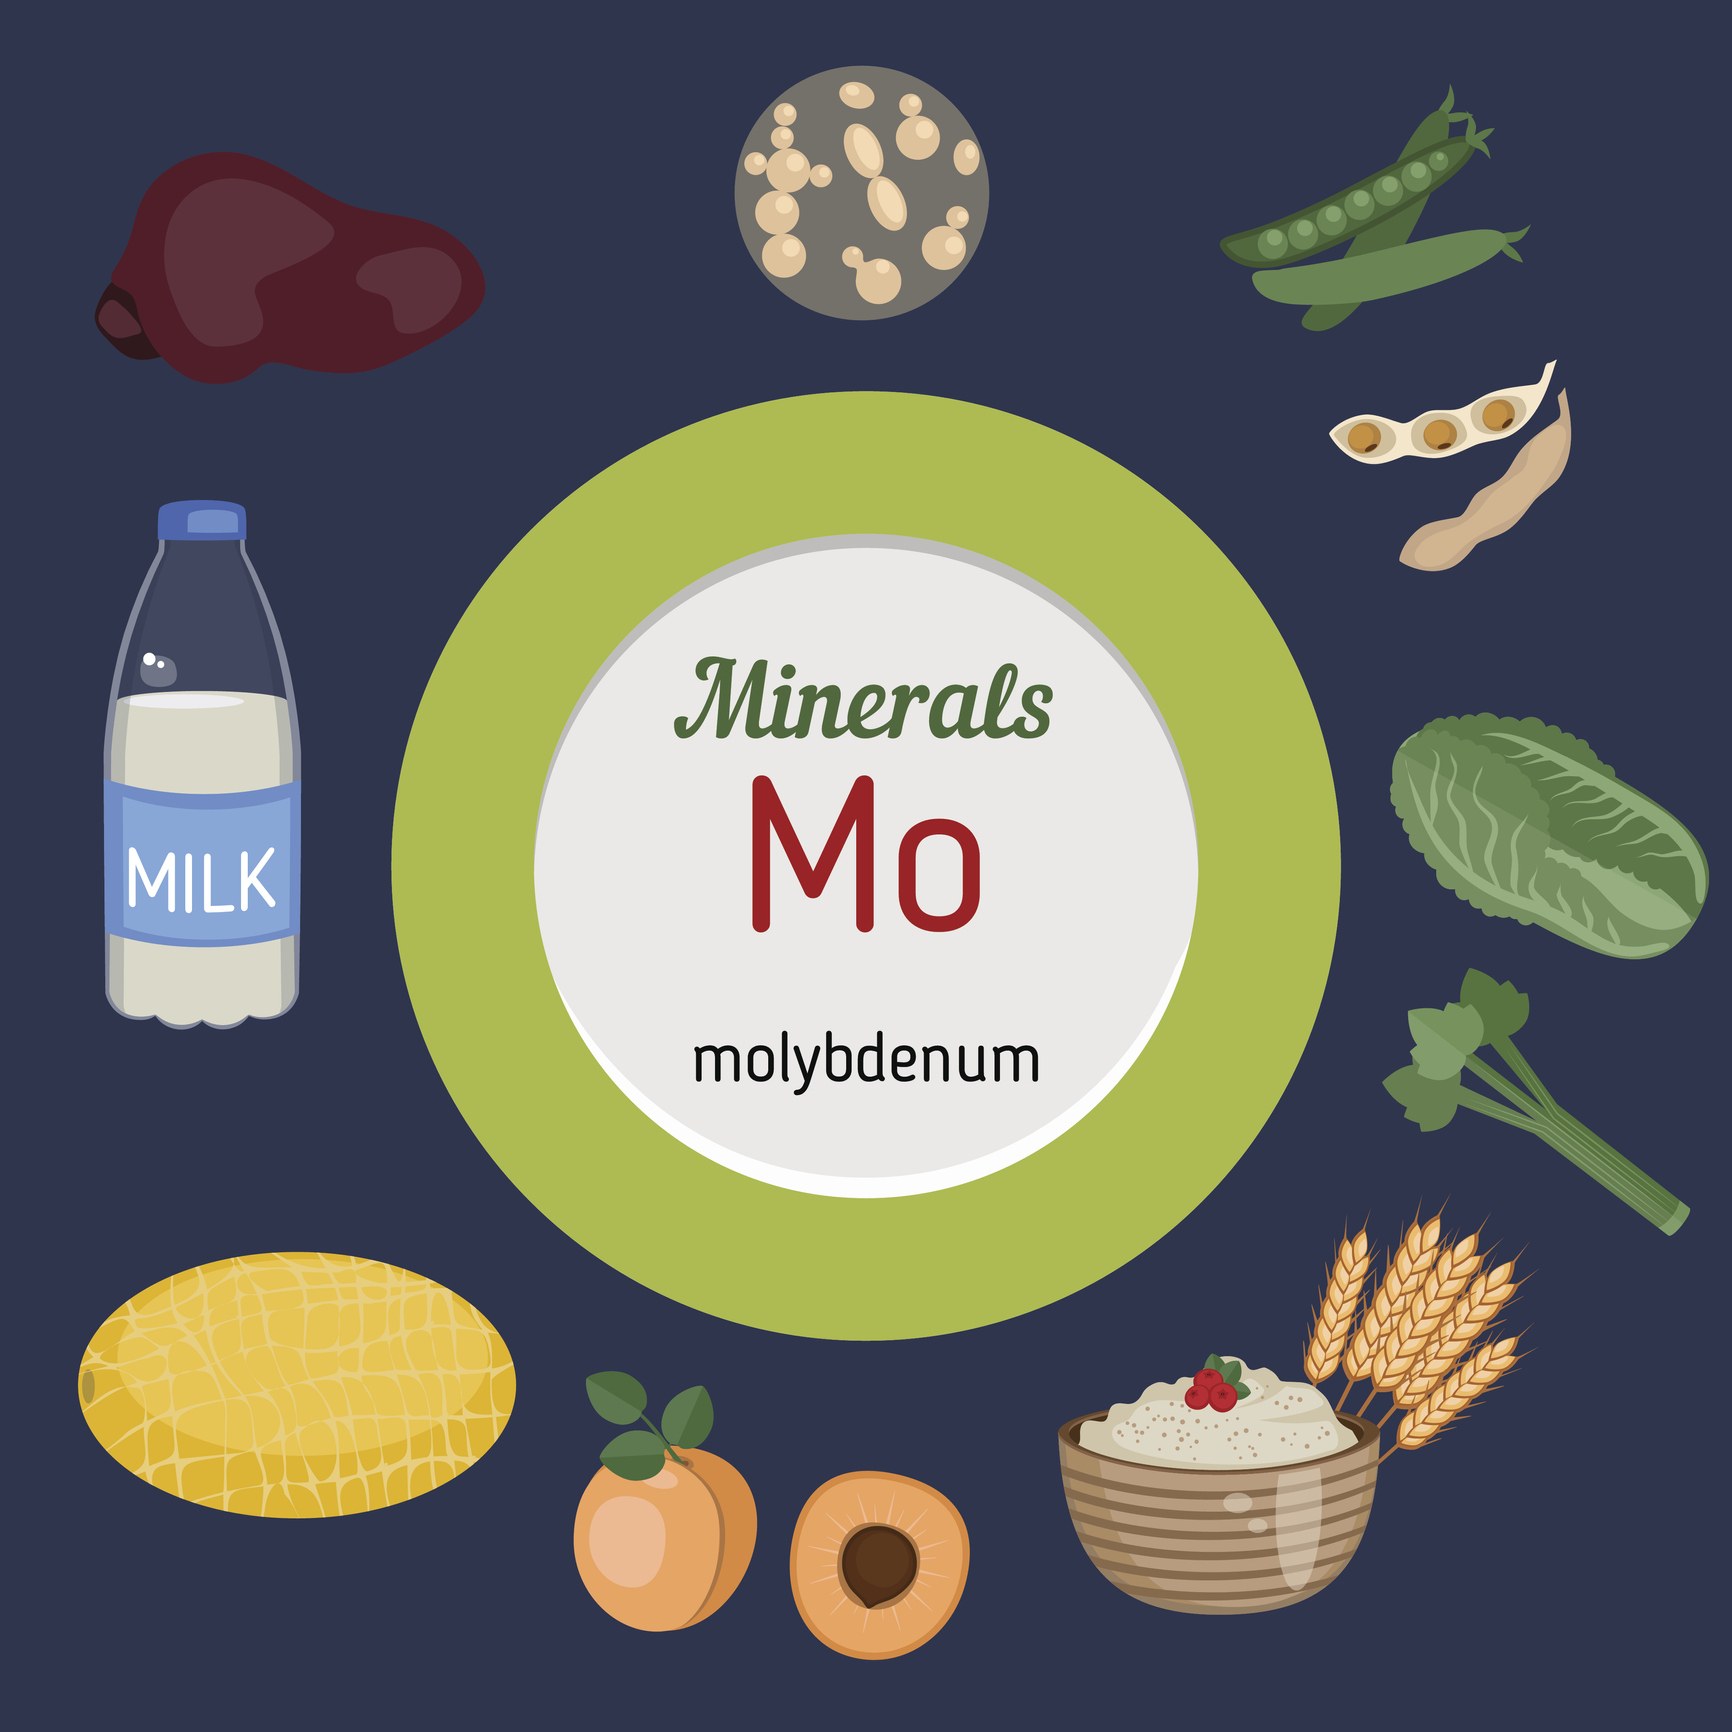 The primary sources of molybdenum for humans are plant and animal foods.